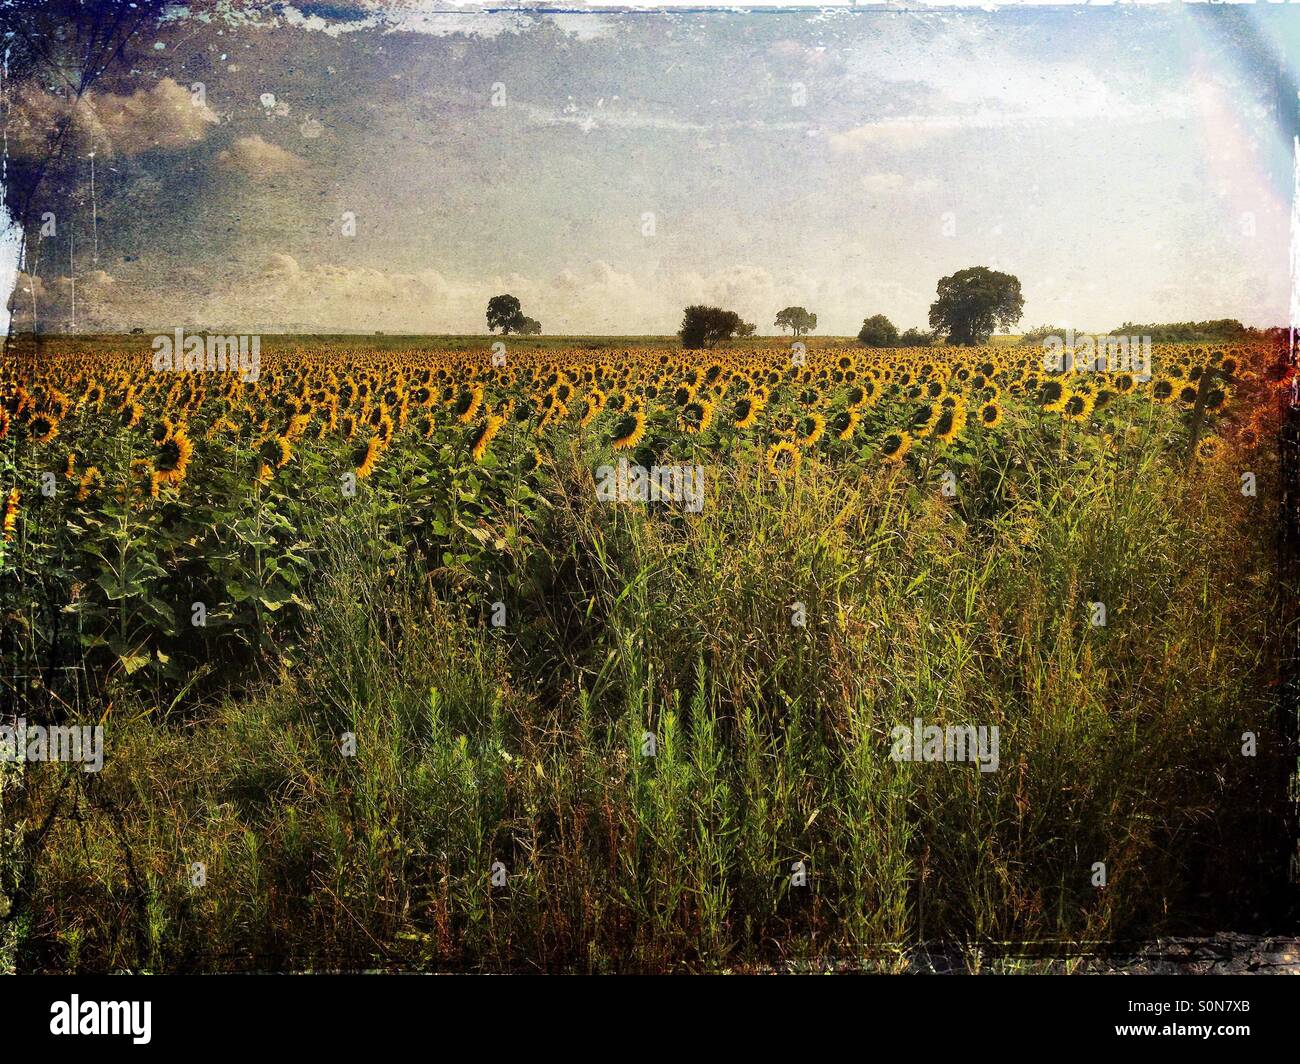 Watching the landscape at sunflower field Stock Photo